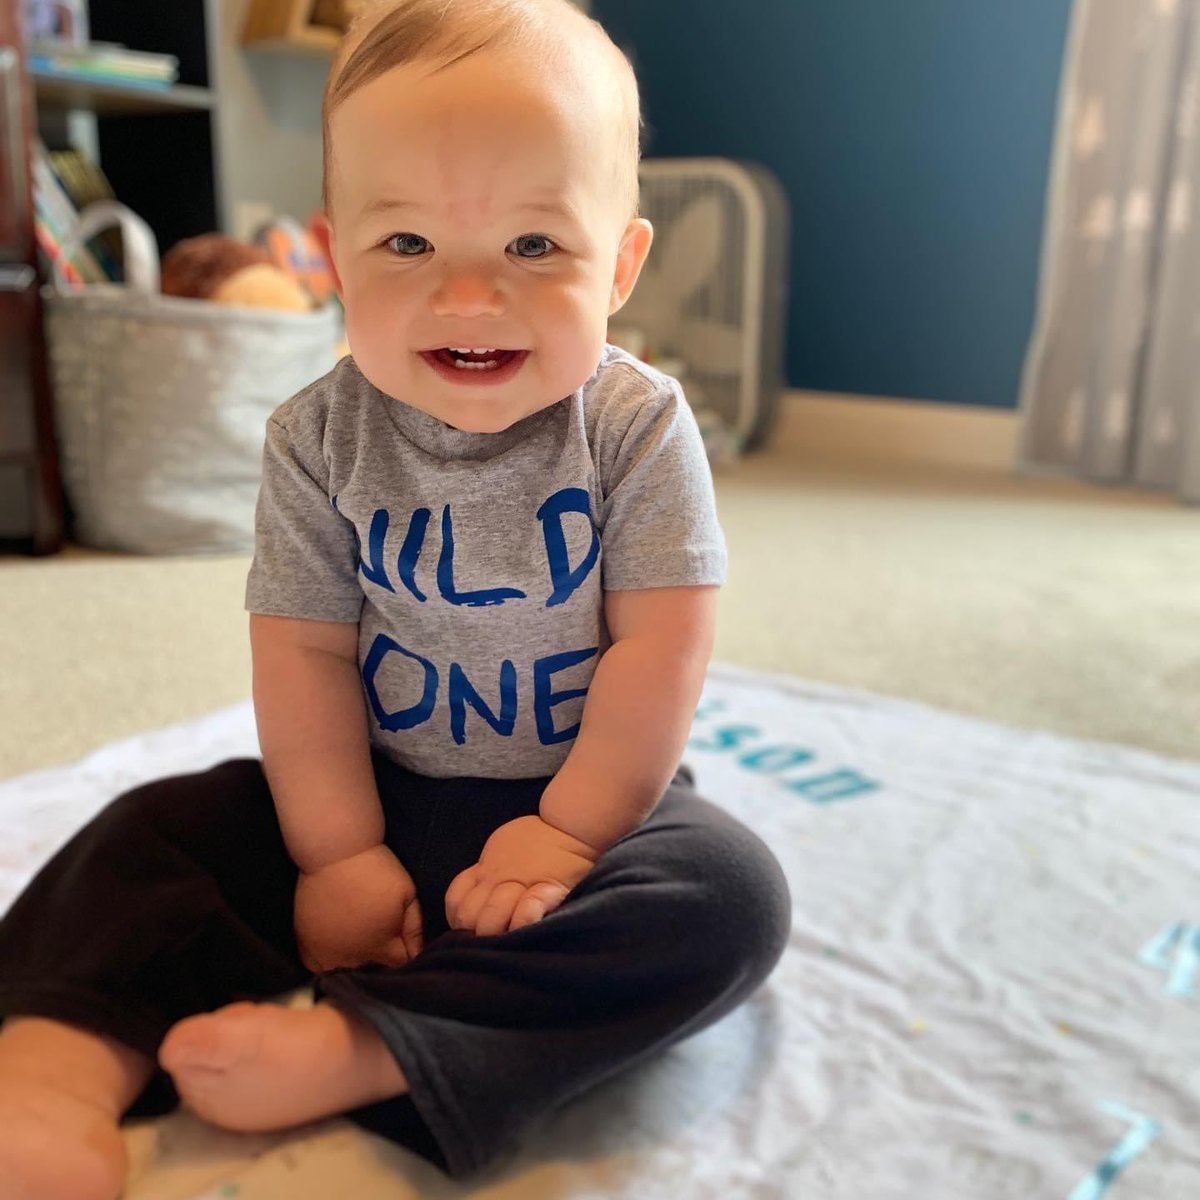 This sweet boy turned one today, and even though we didn’t have the party we had planned to have, we were still able to celebrate with family through zoom! #HealthyAtHome #TeamKentucky @mr_adams31 #SomeGoodNews